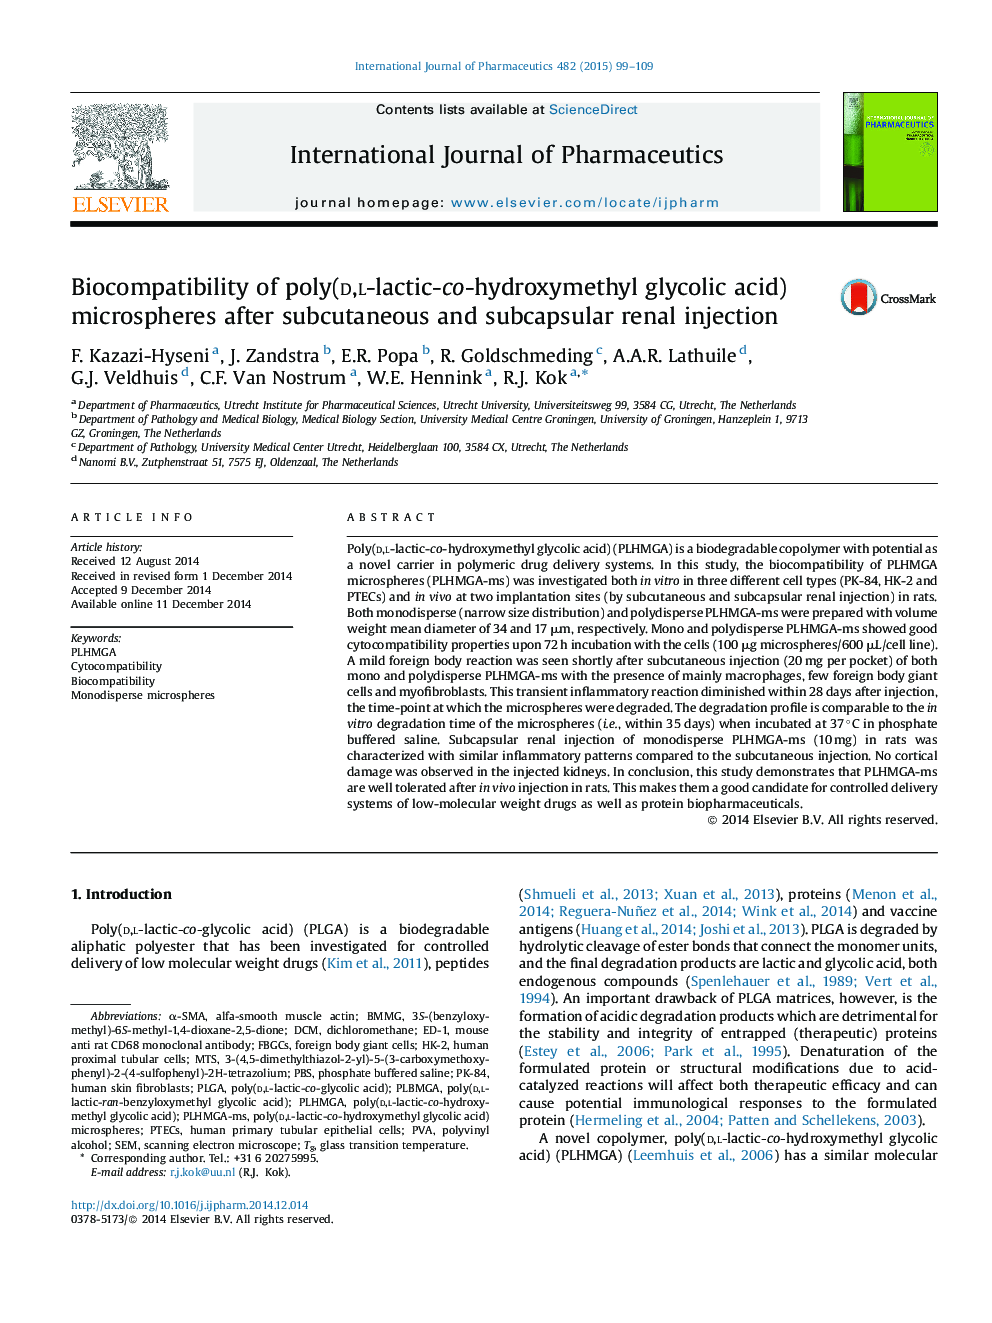 Biocompatibility of poly(d,l-lactic-co-hydroxymethyl glycolic acid) microspheres after subcutaneous and subcapsular renal injection